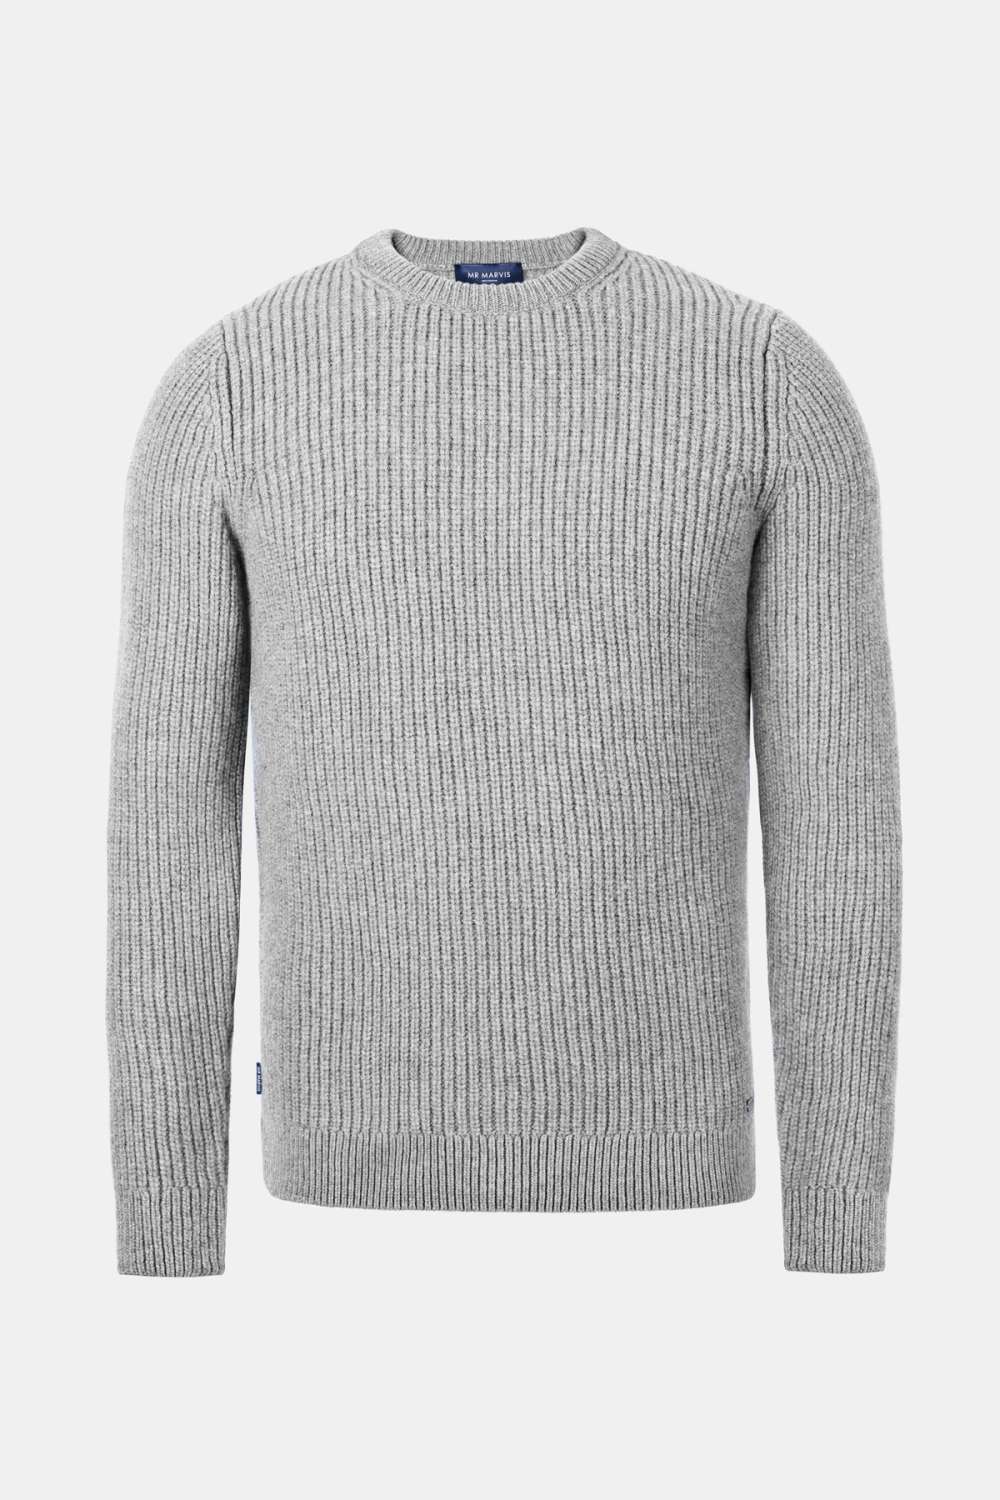 Oysters - Die Knit Pullovers